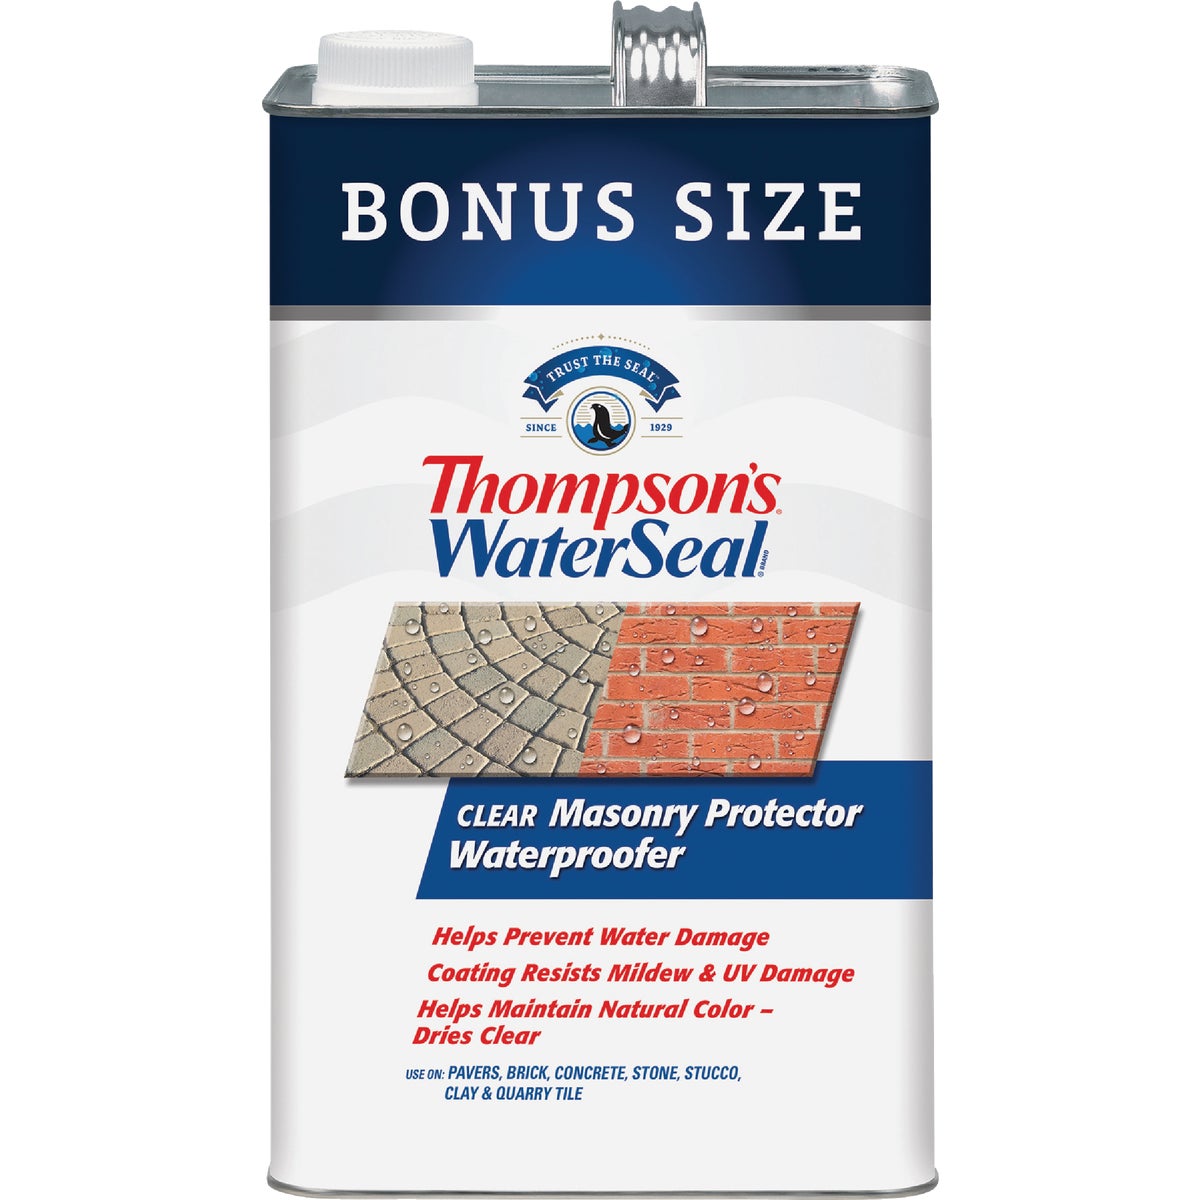 Item 770925, Provide waterproofing protection for all masonry surfaces including pavers